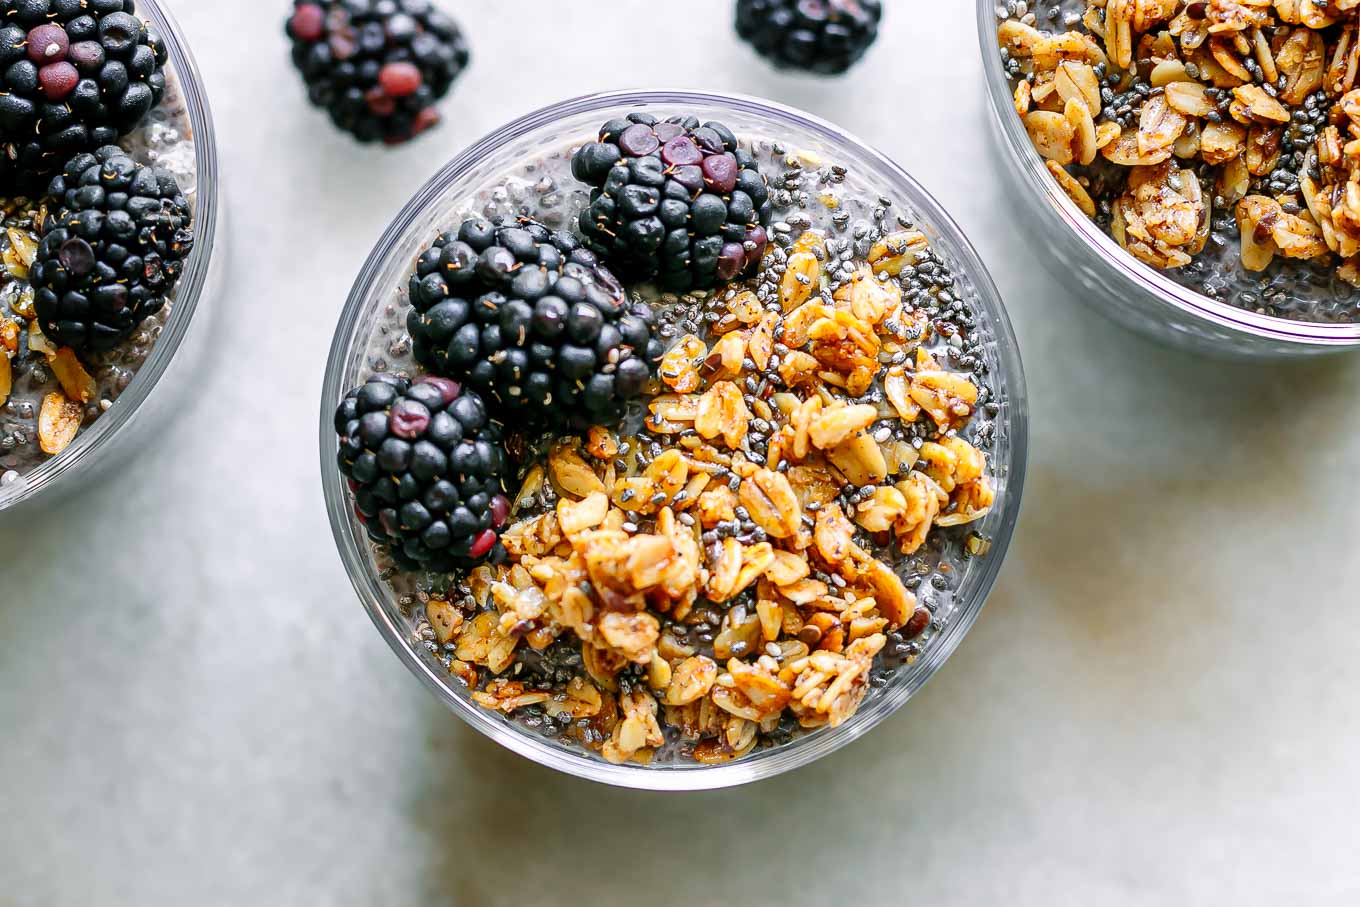 a close up photo of a glass of blackberry-flavored chia seed pudding with granola and fresh blackberries as garnish 